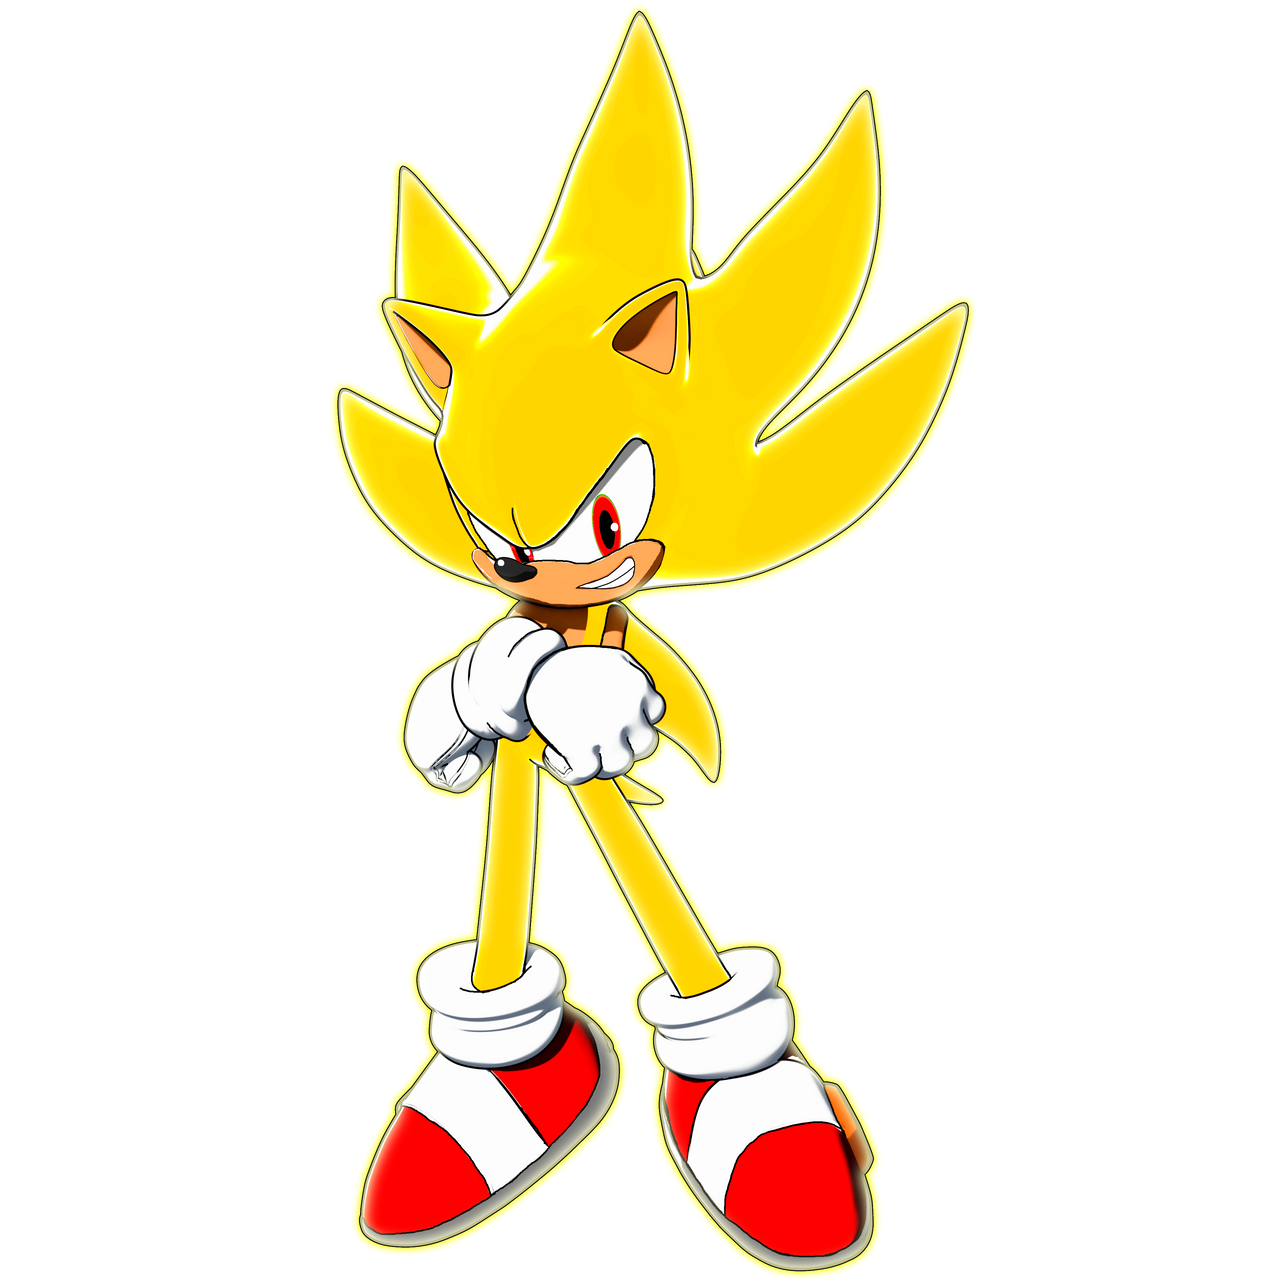 Do you want Hyper Sonic to return back to the Sonic Games? #Sonic